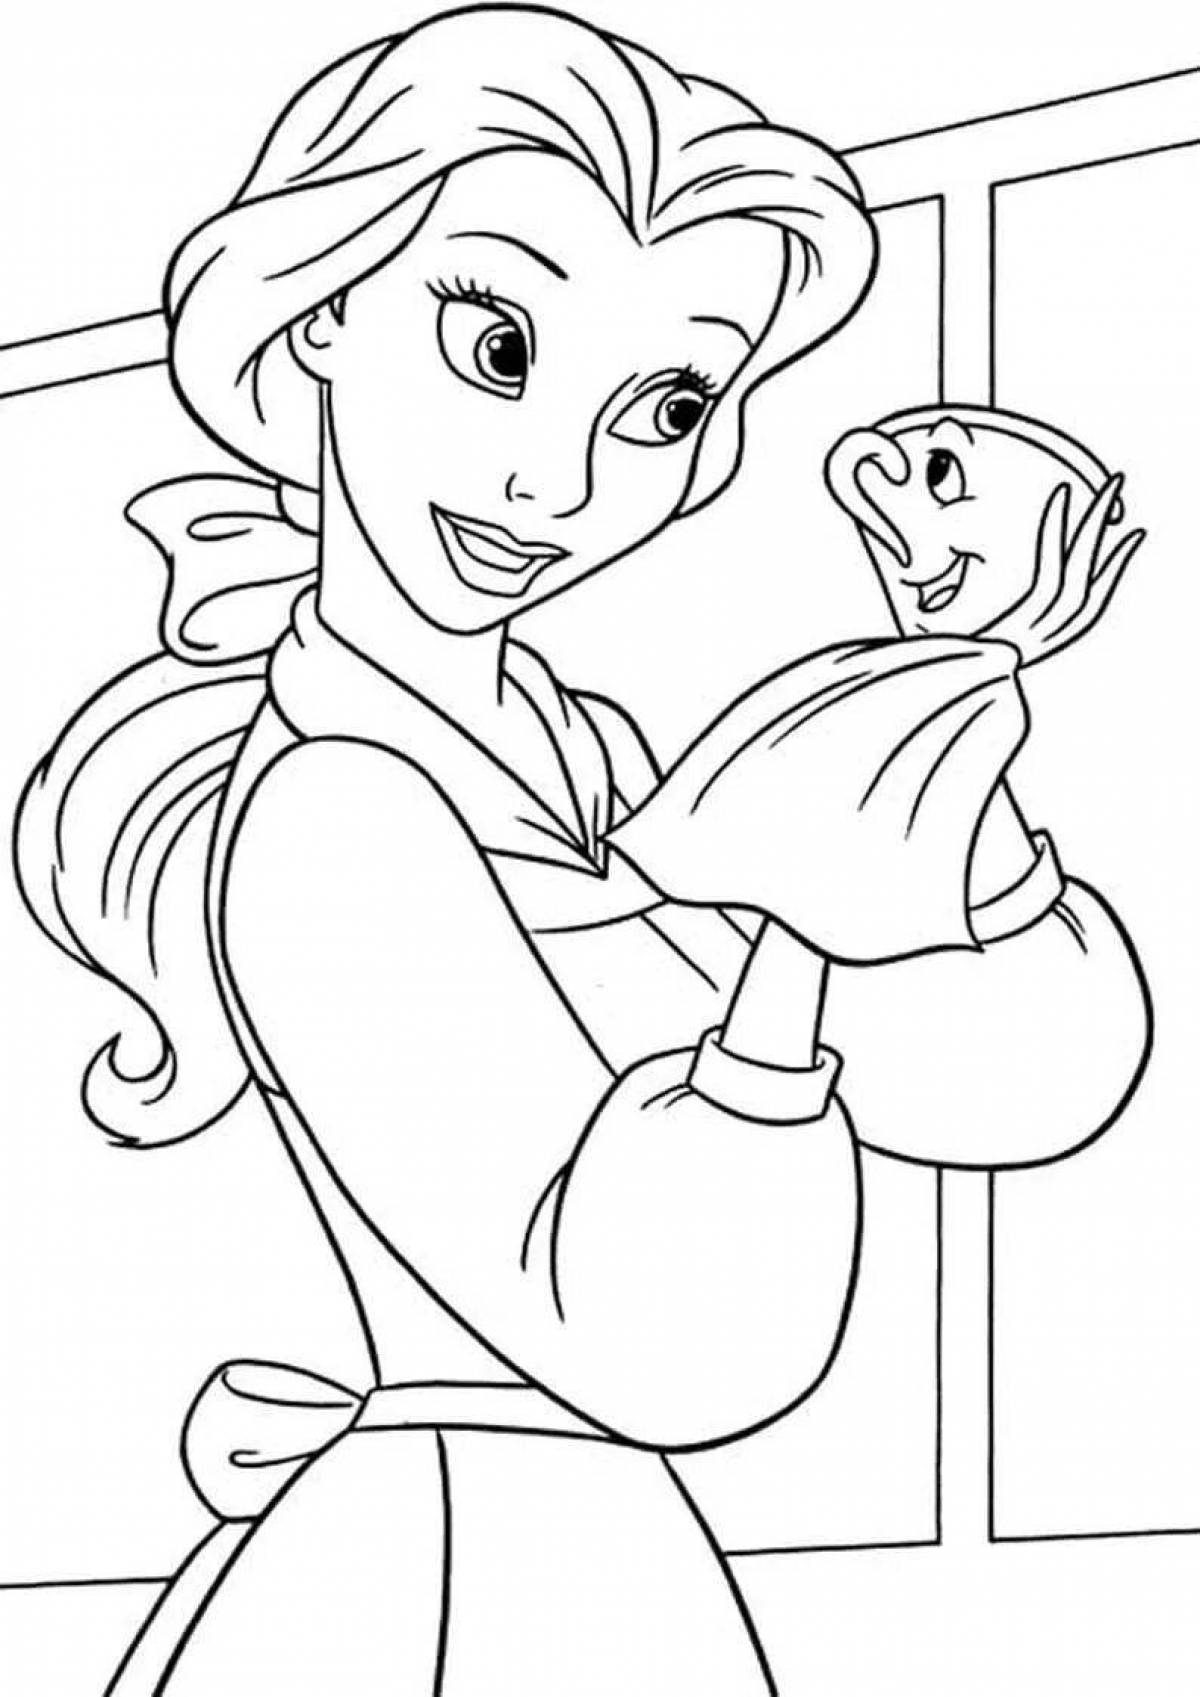 Amazing lingerie coloring page for kids